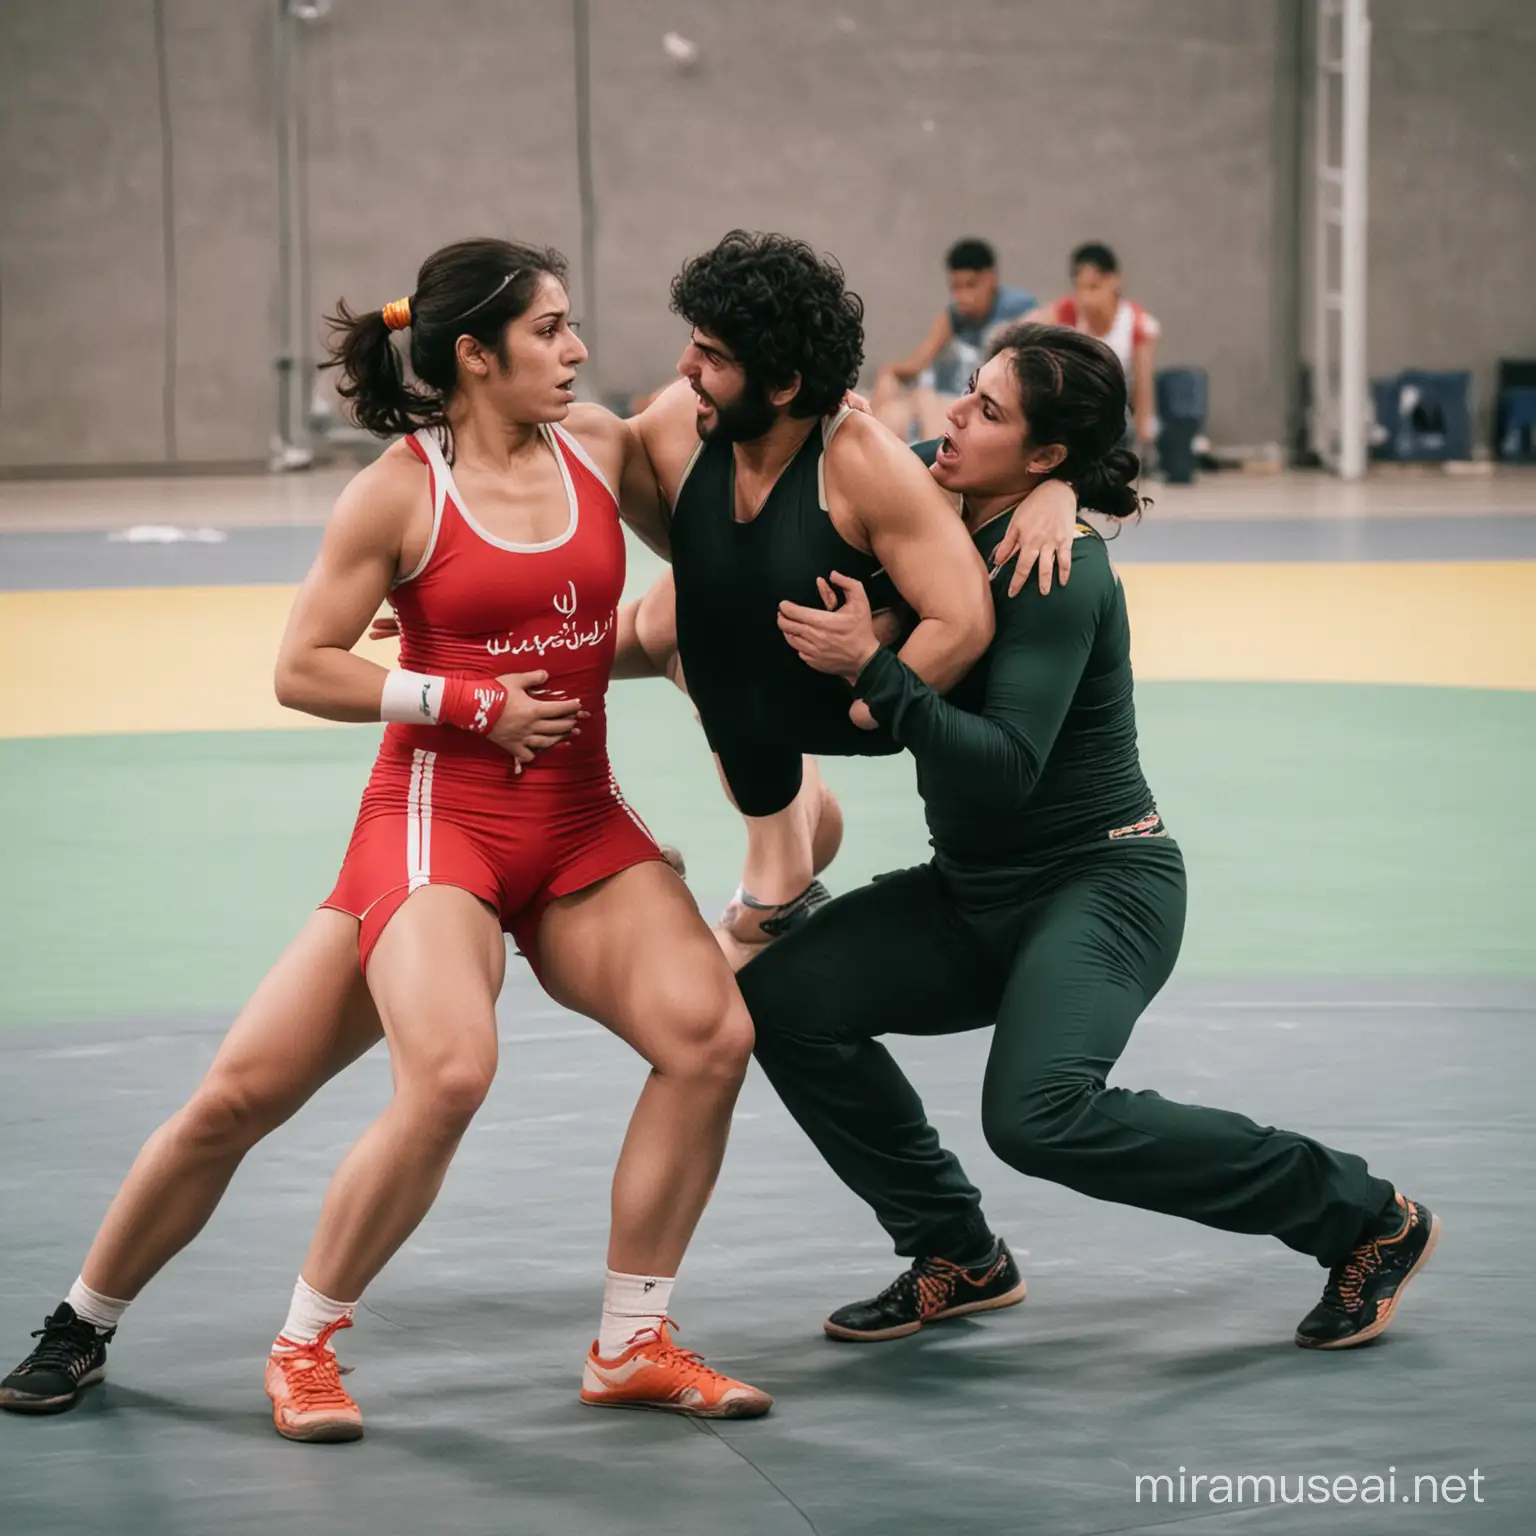 Iranian Woman Wrestling Against Man with Female Wrestler